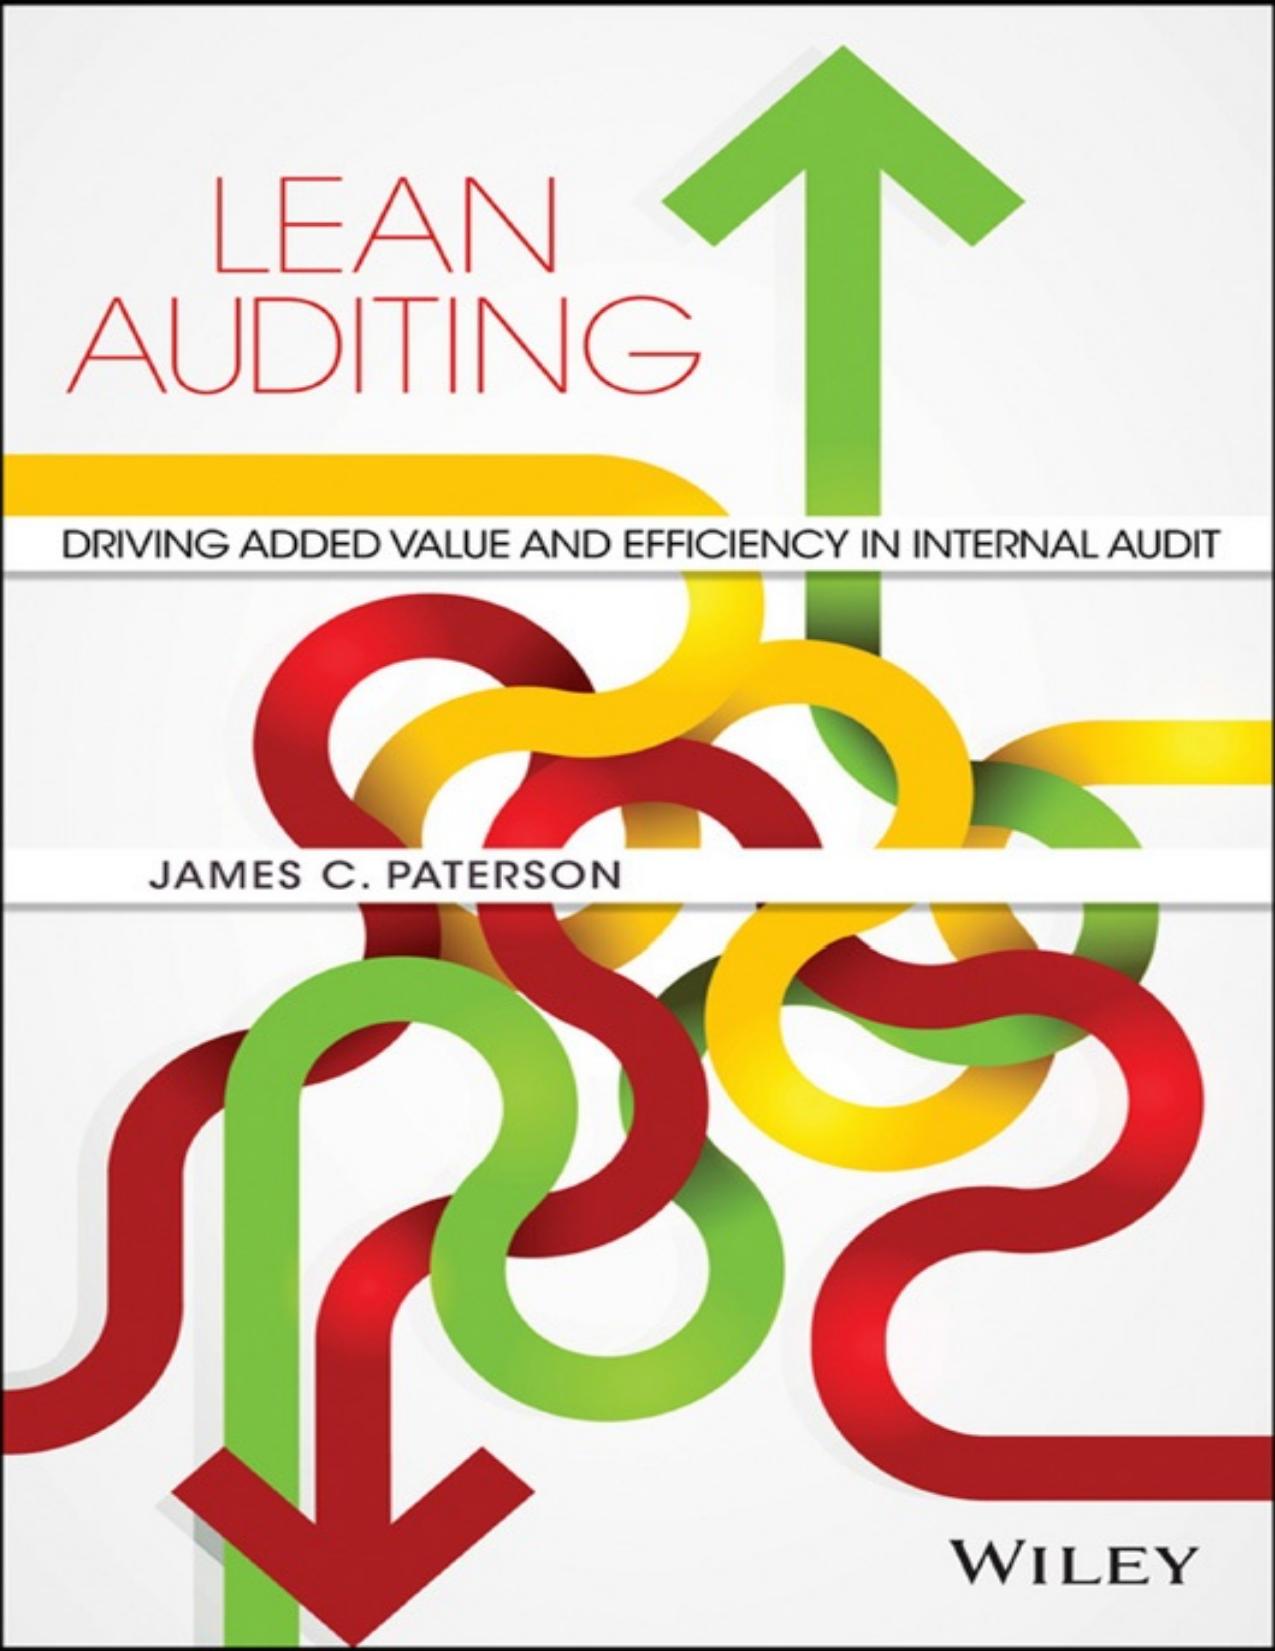 Lean Auditing: Driving Added Value and Efficiency in Internal Audit - PDFDrive.com